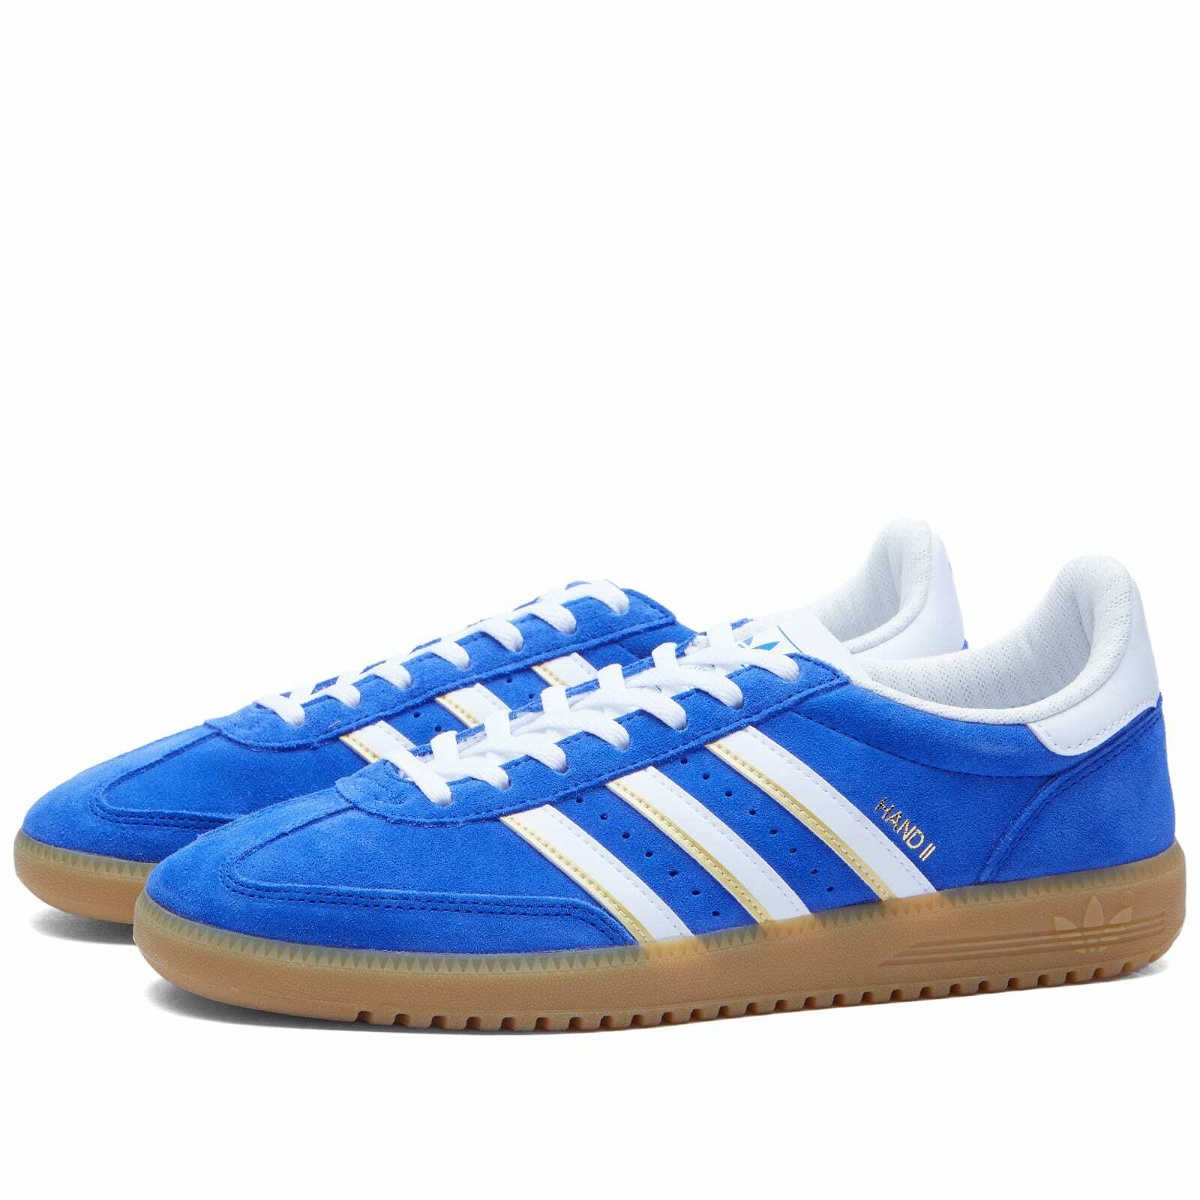 Lucid 2 Sneakers Adidas Hand adidas in Semi Blue/White